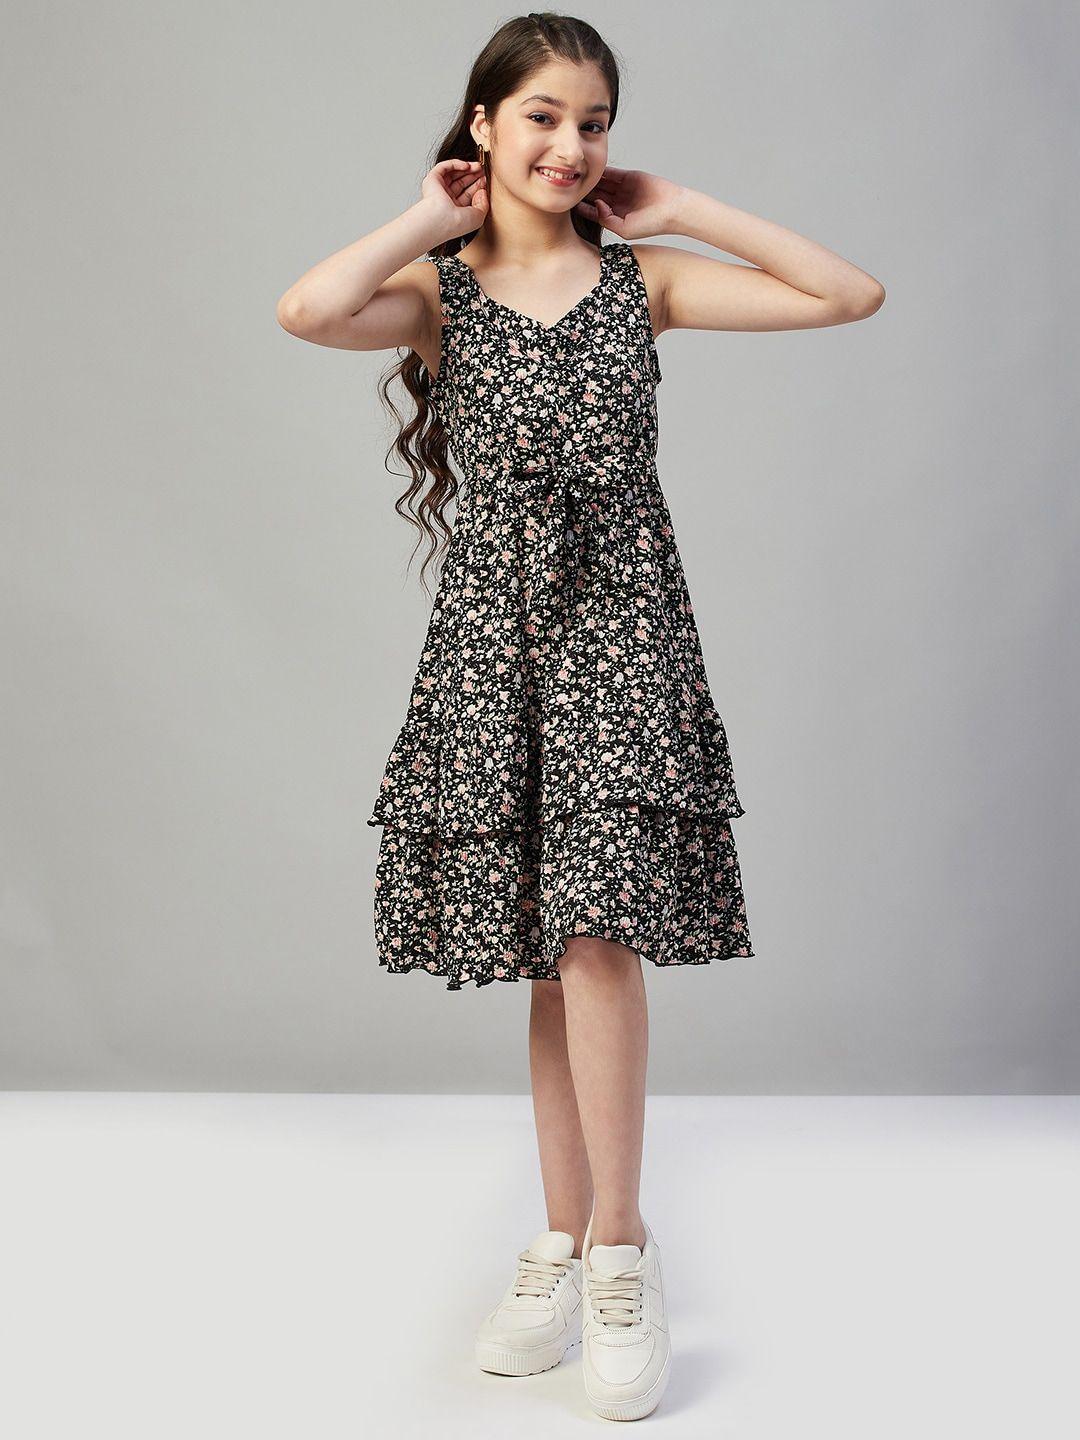 Stylo Bug Girls Floral Printed Layered Fit & Flare Dress